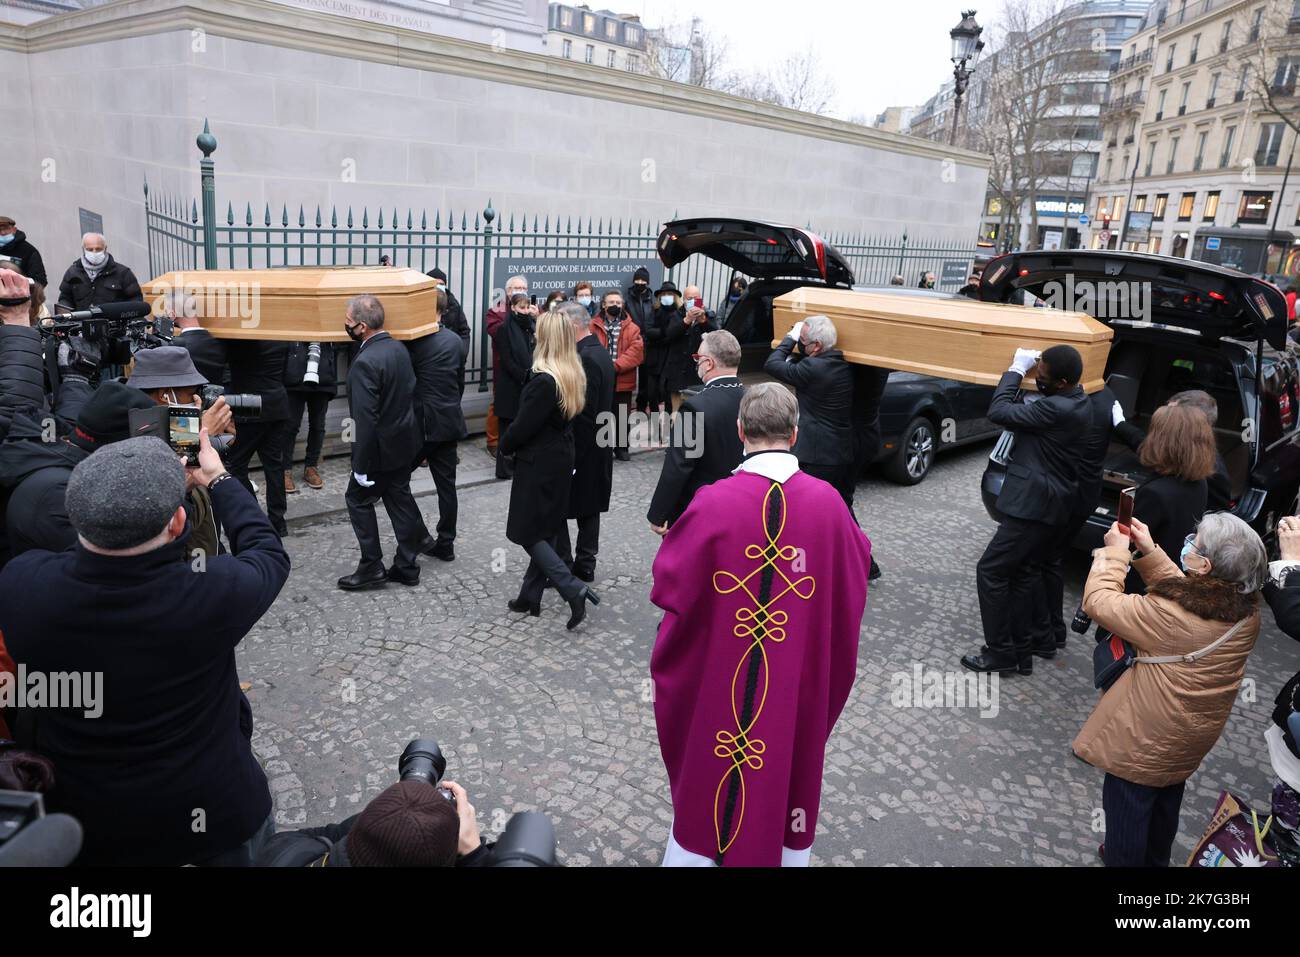 ©PHOTOPQR/LE PARISIEN/LP / Arnaud Journois ; PARIS ; 10/01/2022 ; OBSEQUES DES FRERES IGOR ET GRICHKA BOGDANOFF A LA MADELEINE A PARIS - Paris, France, jan 10th 2021. Igor and Grichka Bogdanoff, known as brothers Bogdanoff, funerals Twin brothers died six days apart from Covid-19 A mass in homage to Igor and Grichka Bogdanoff will be celebrated Monday at 3 p.m. in the Madeleine church in Paris, the family announced on Wednesday in a statement. 'Their burial will take place in strict privacy,' adds the short text sent by the agent of the famous twins carried away by the Covid-19 six days apart. Stock Photo